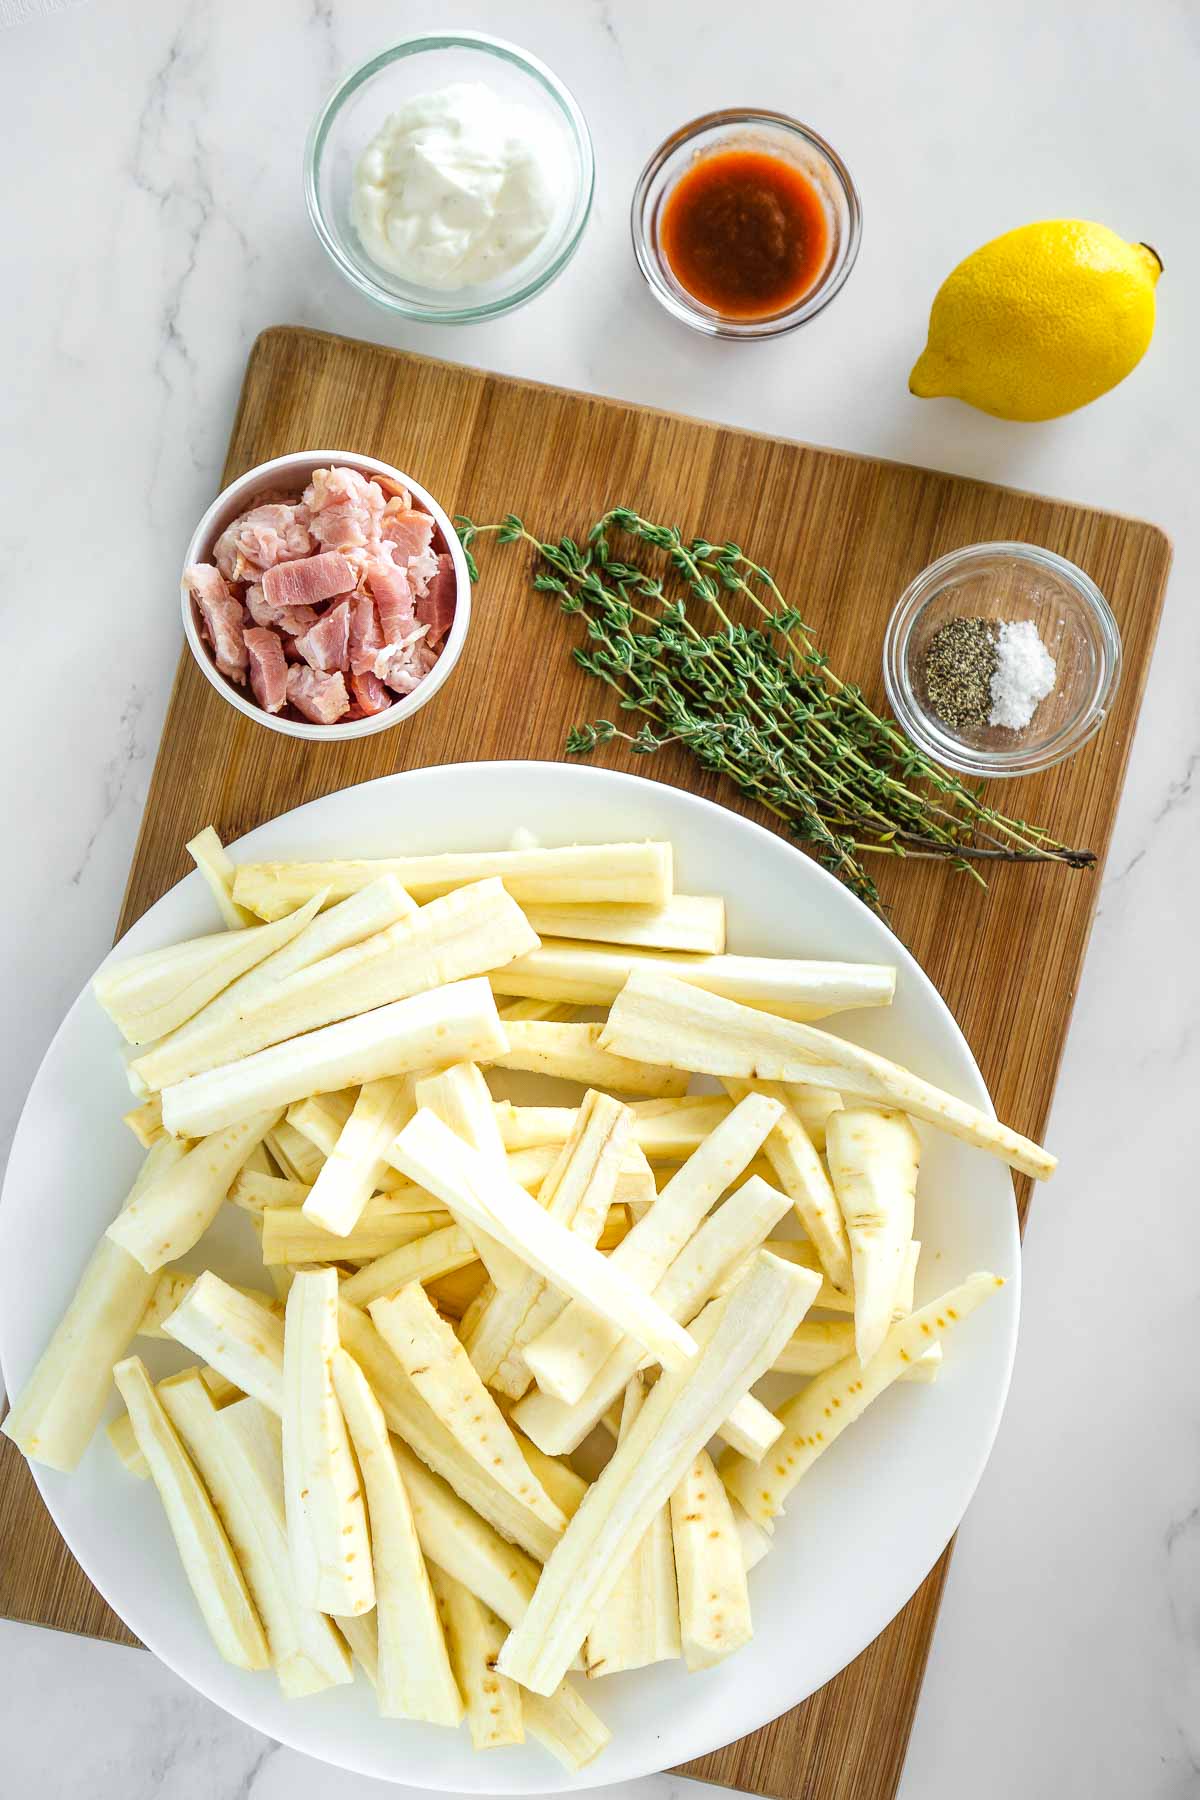 Ingredients to make roasted parsnip fries with bacon